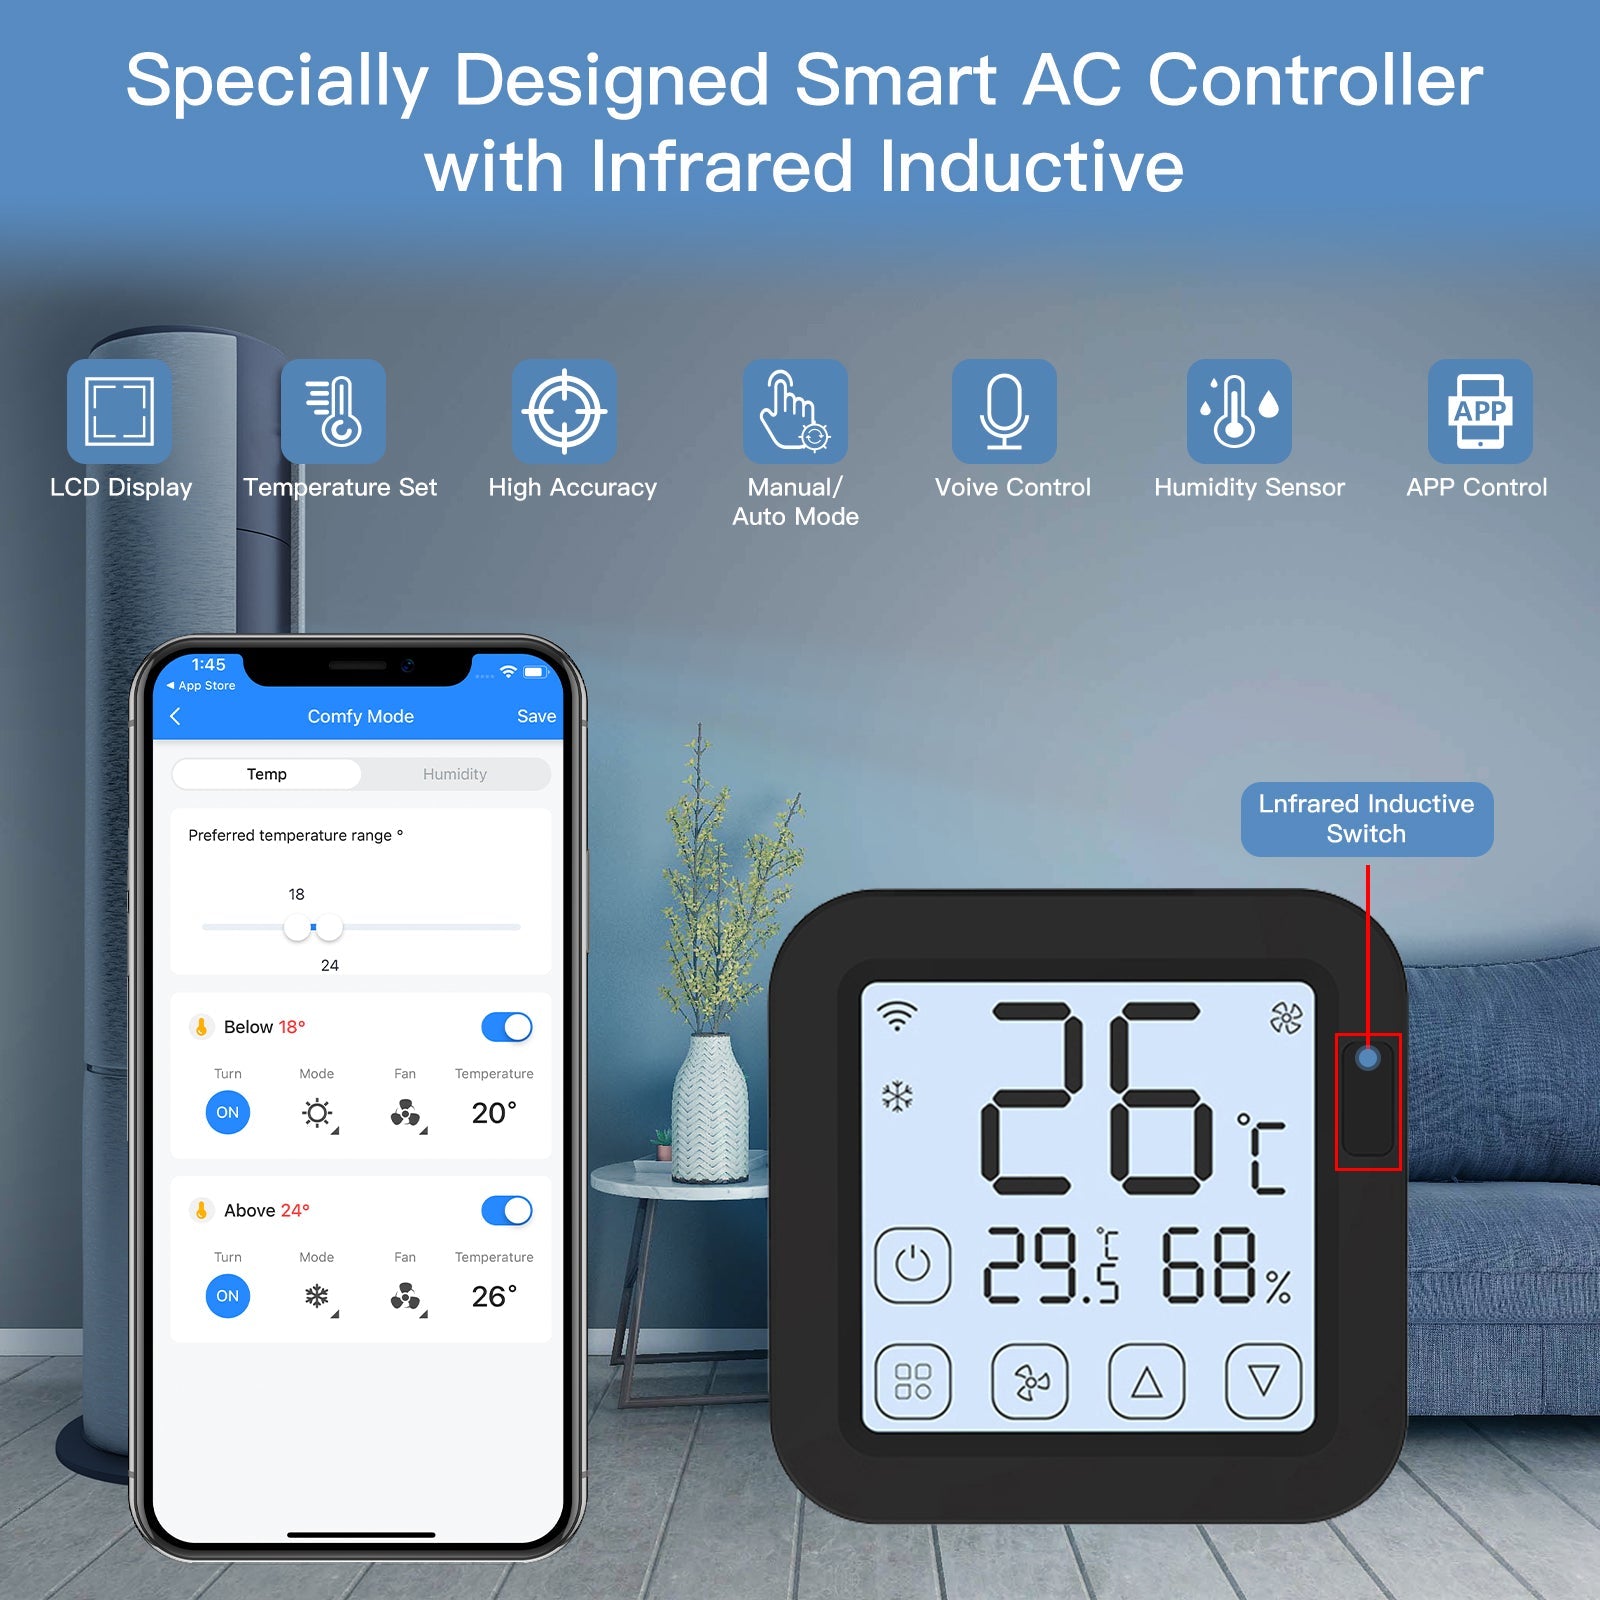 MOES Tuya WiFi Smart IR Thermostat AC Remote Controller Temperature and Humidity Sensor - MOES